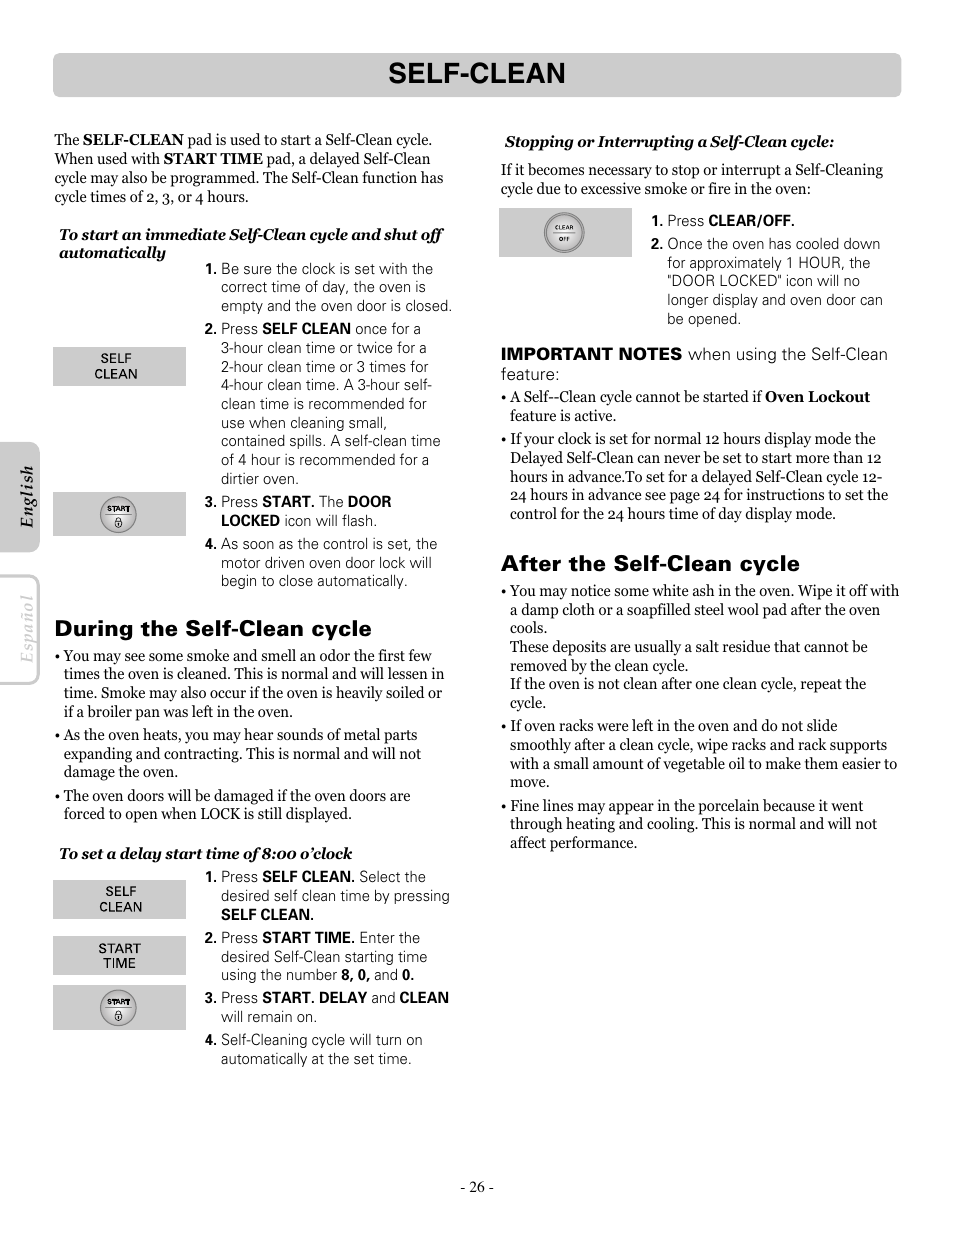 Self-clean, During the self-clean cycle, After the self-clean cycle | LG LRE30755SW User Manual | Page 26 / 36